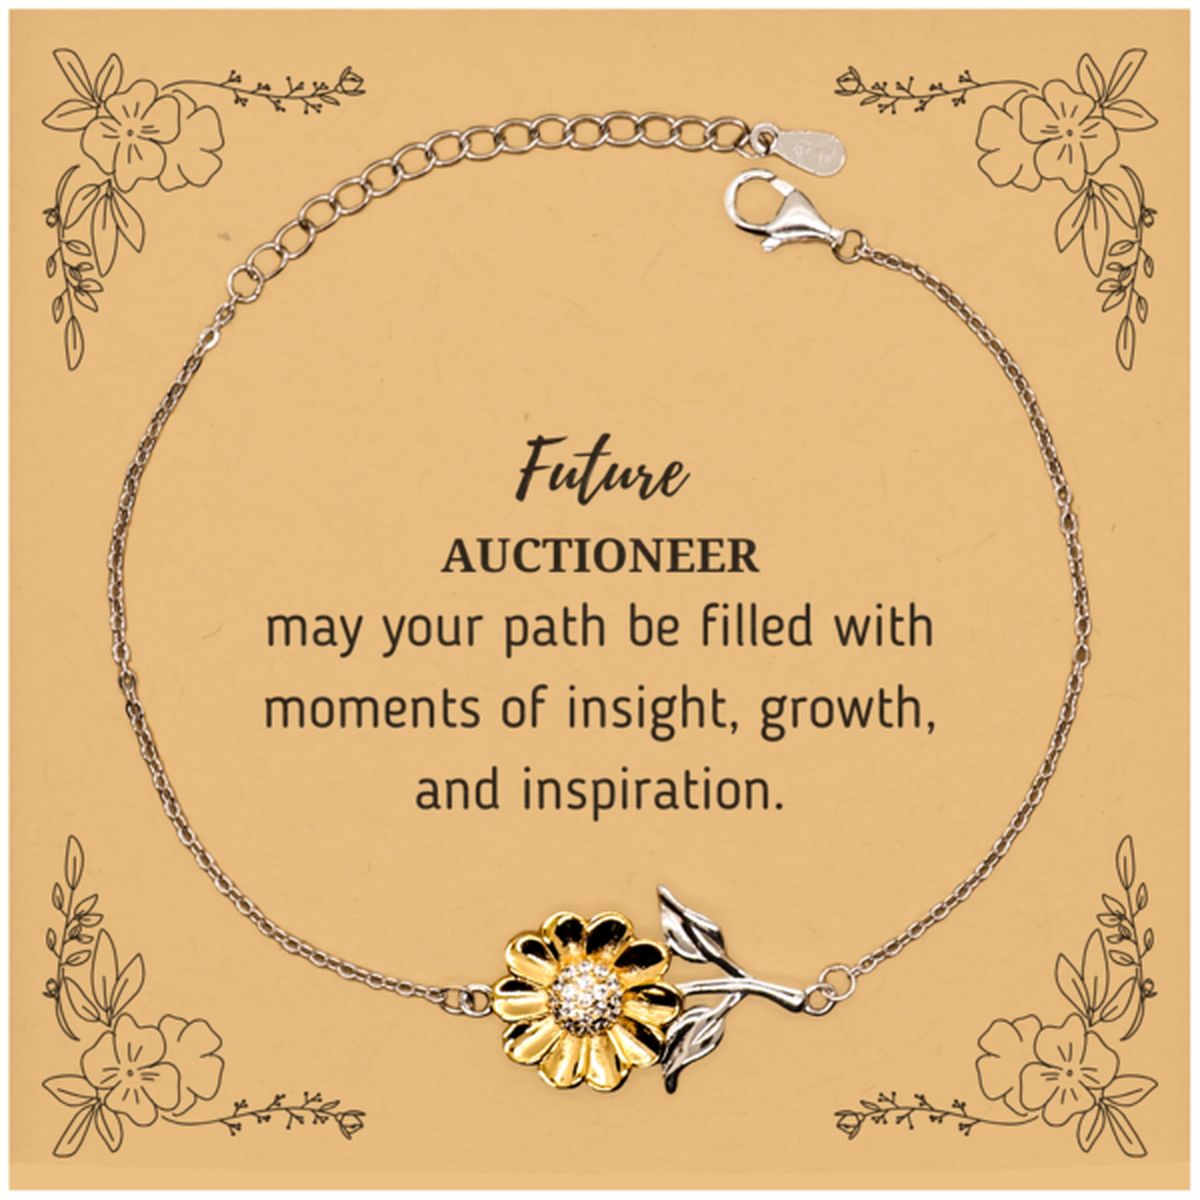 Future Auctioneer Gifts, May your path be filled with moments of insight, Graduation Gifts for New Auctioneer, Christmas Unique Sunflower Bracelet For Men, Women, Friends